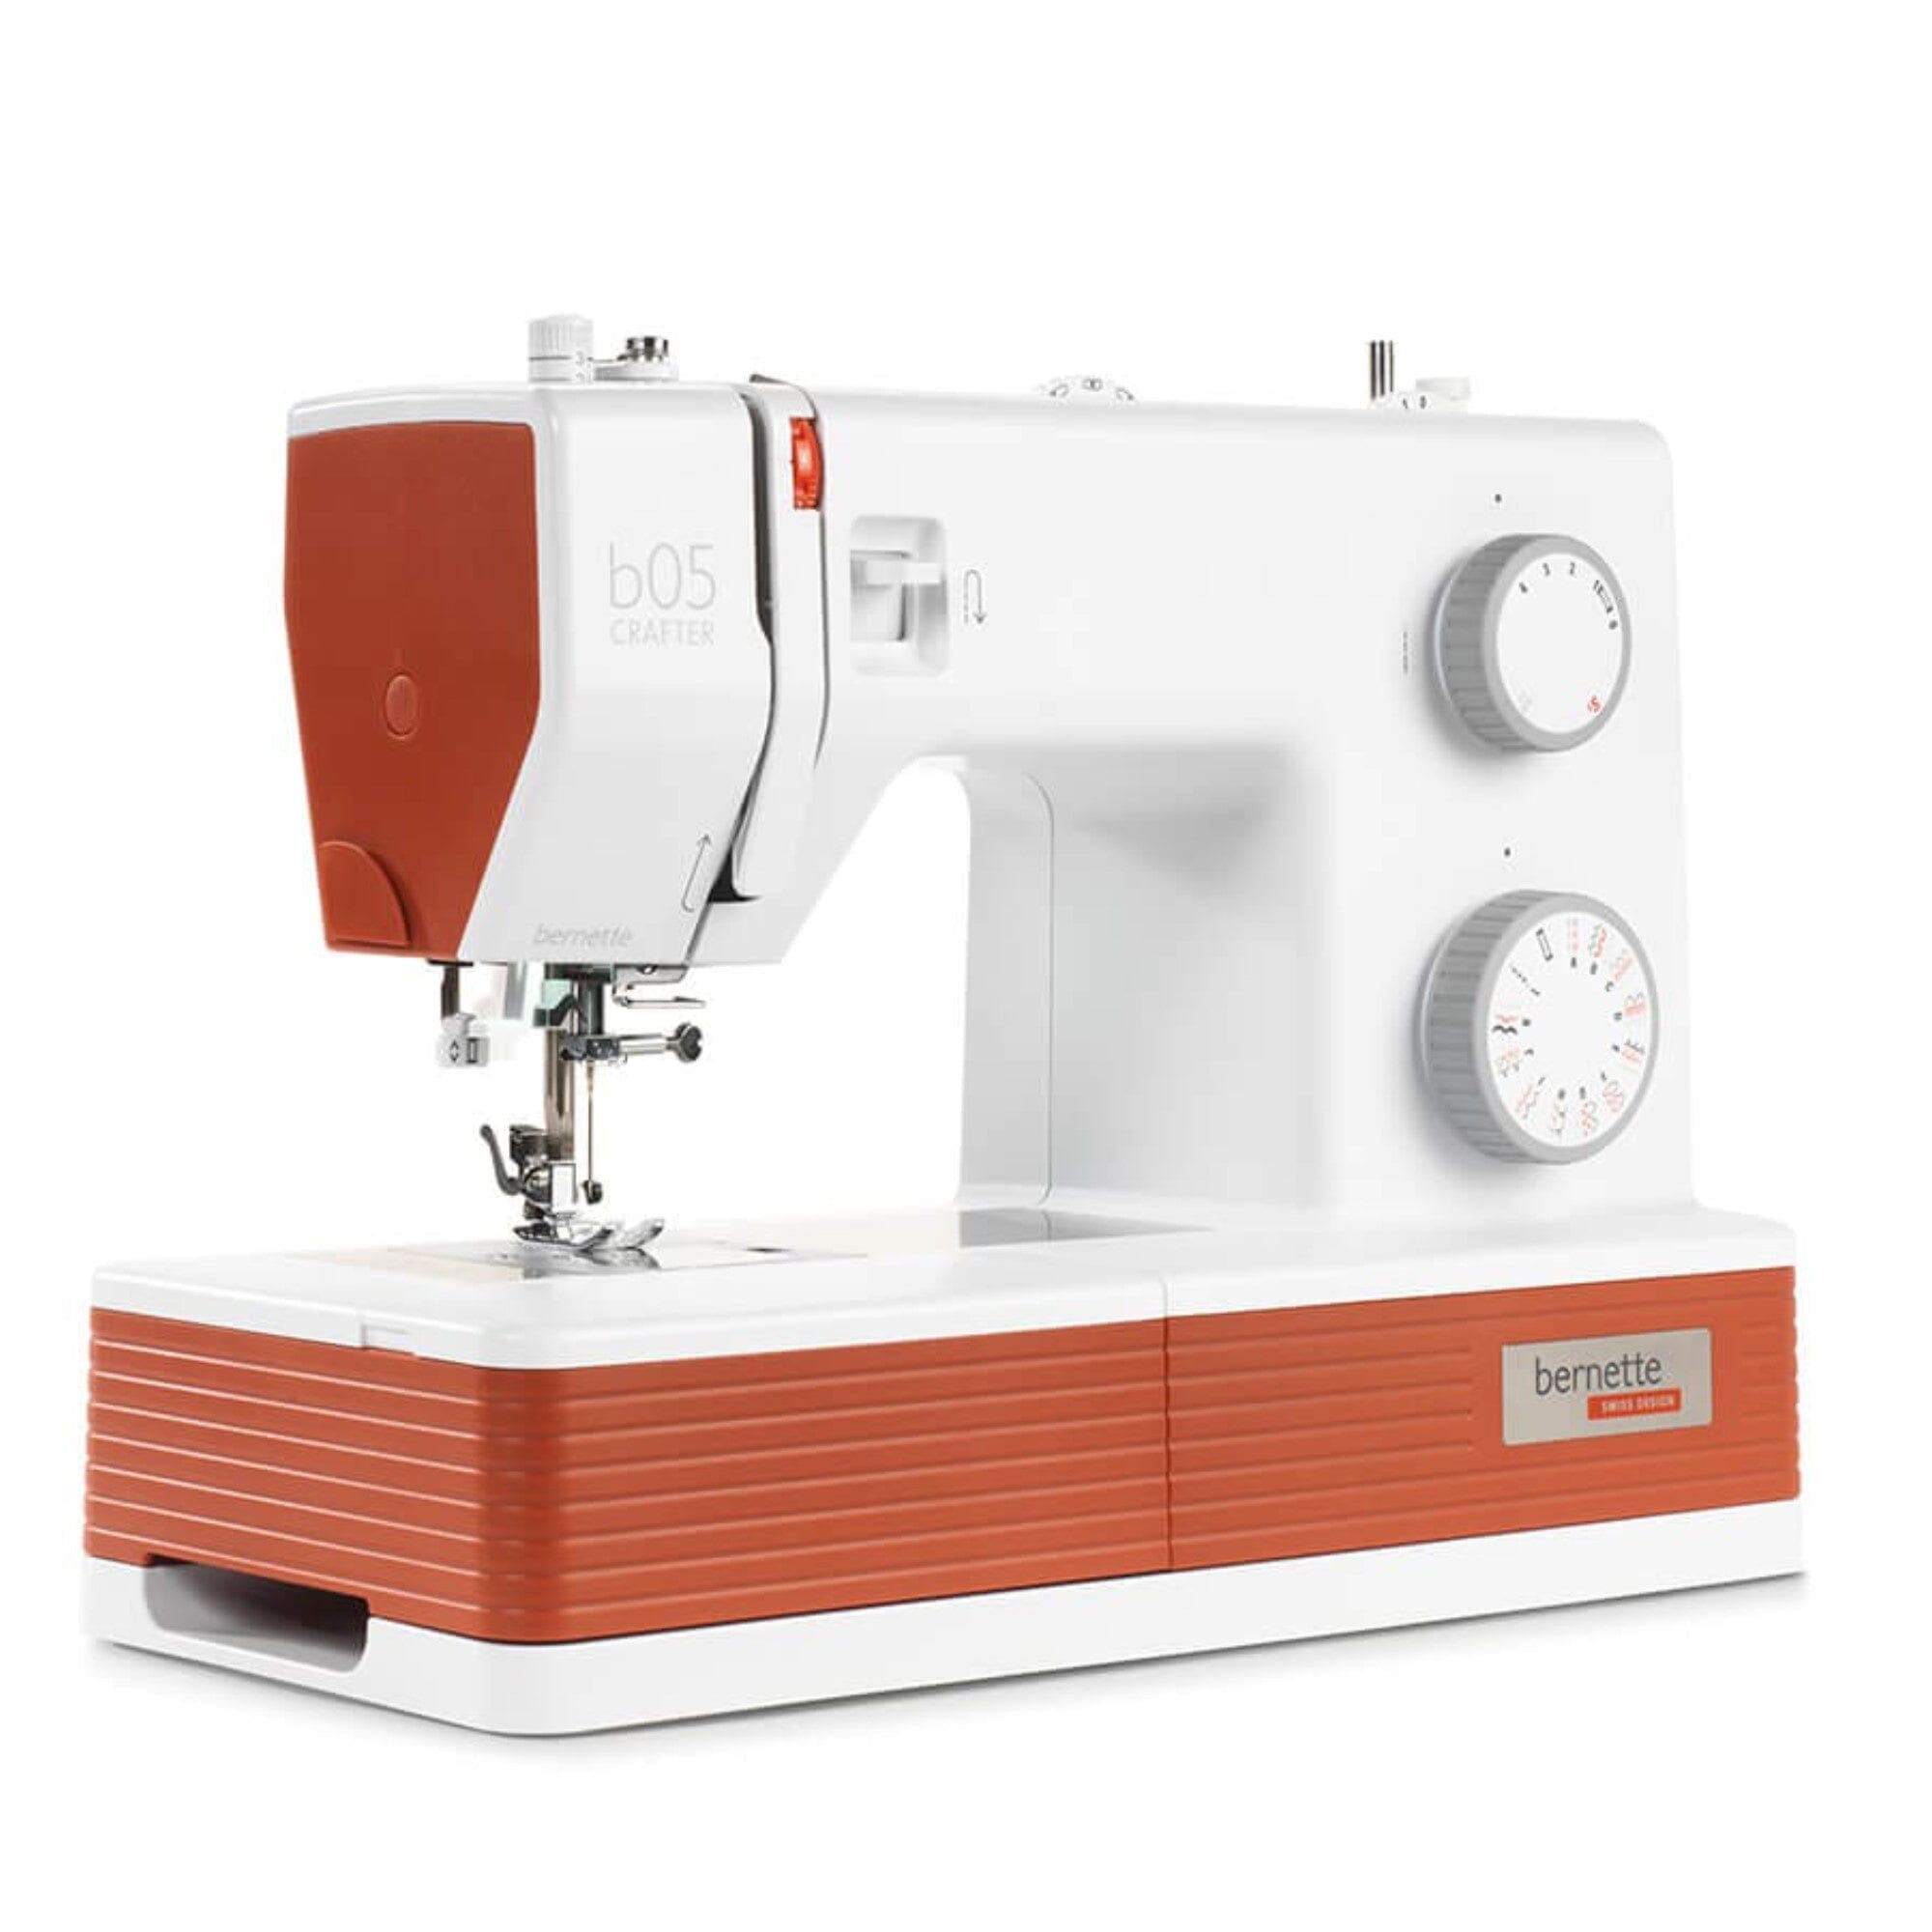 Bernette b05 Crafter Sewing Machine With $199 Bundle